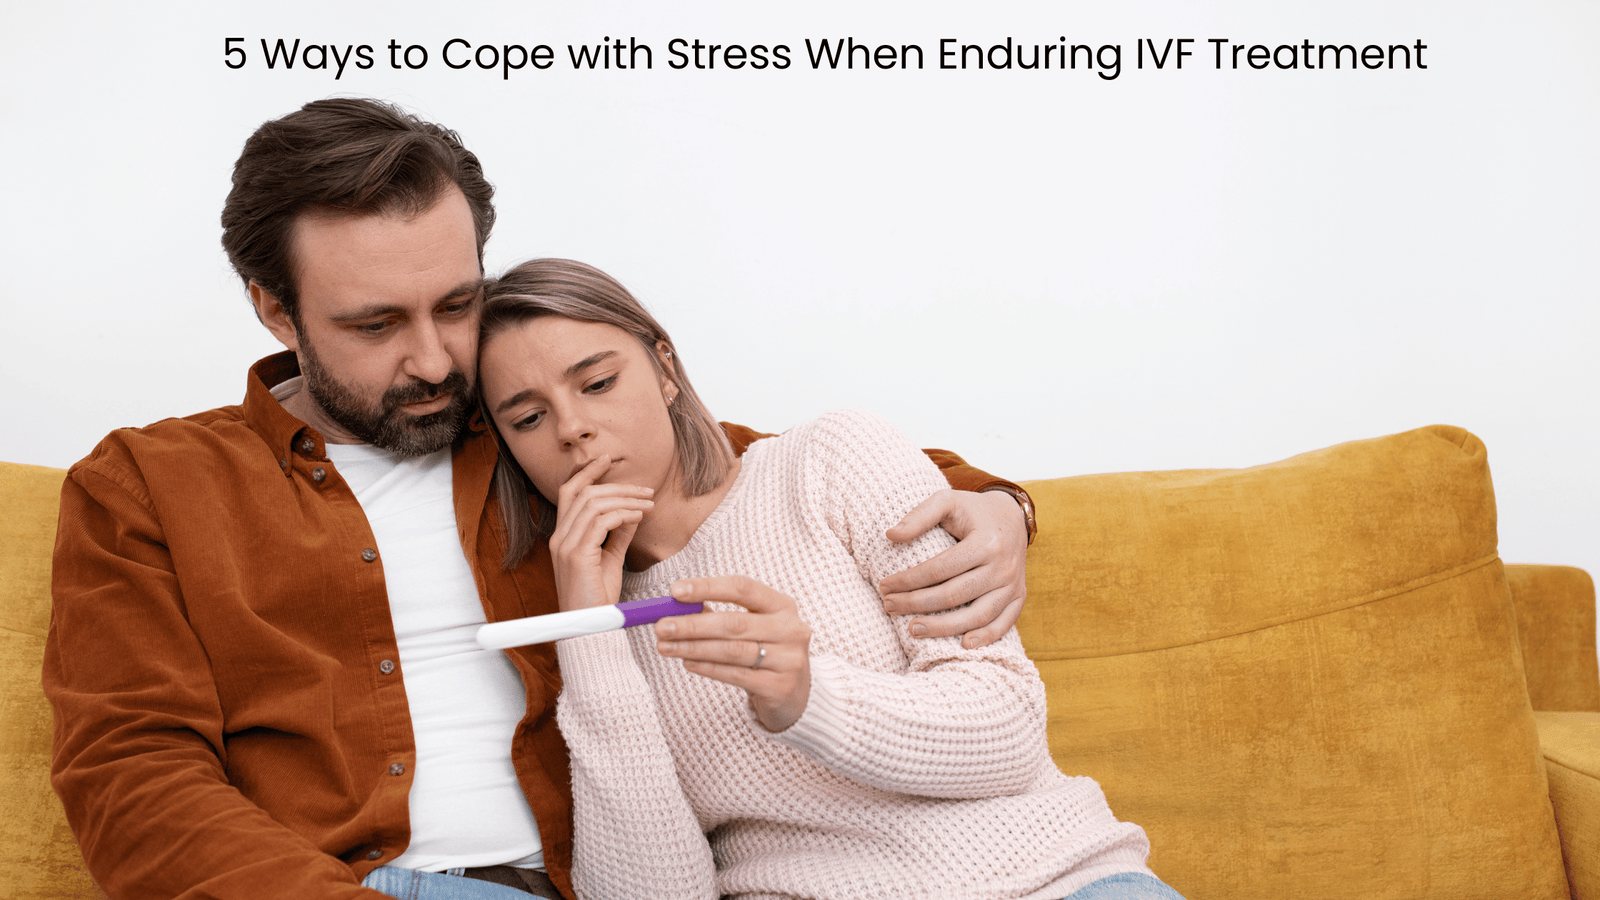 5 Ways to Cope with Stress When Enduring IVF Treatment